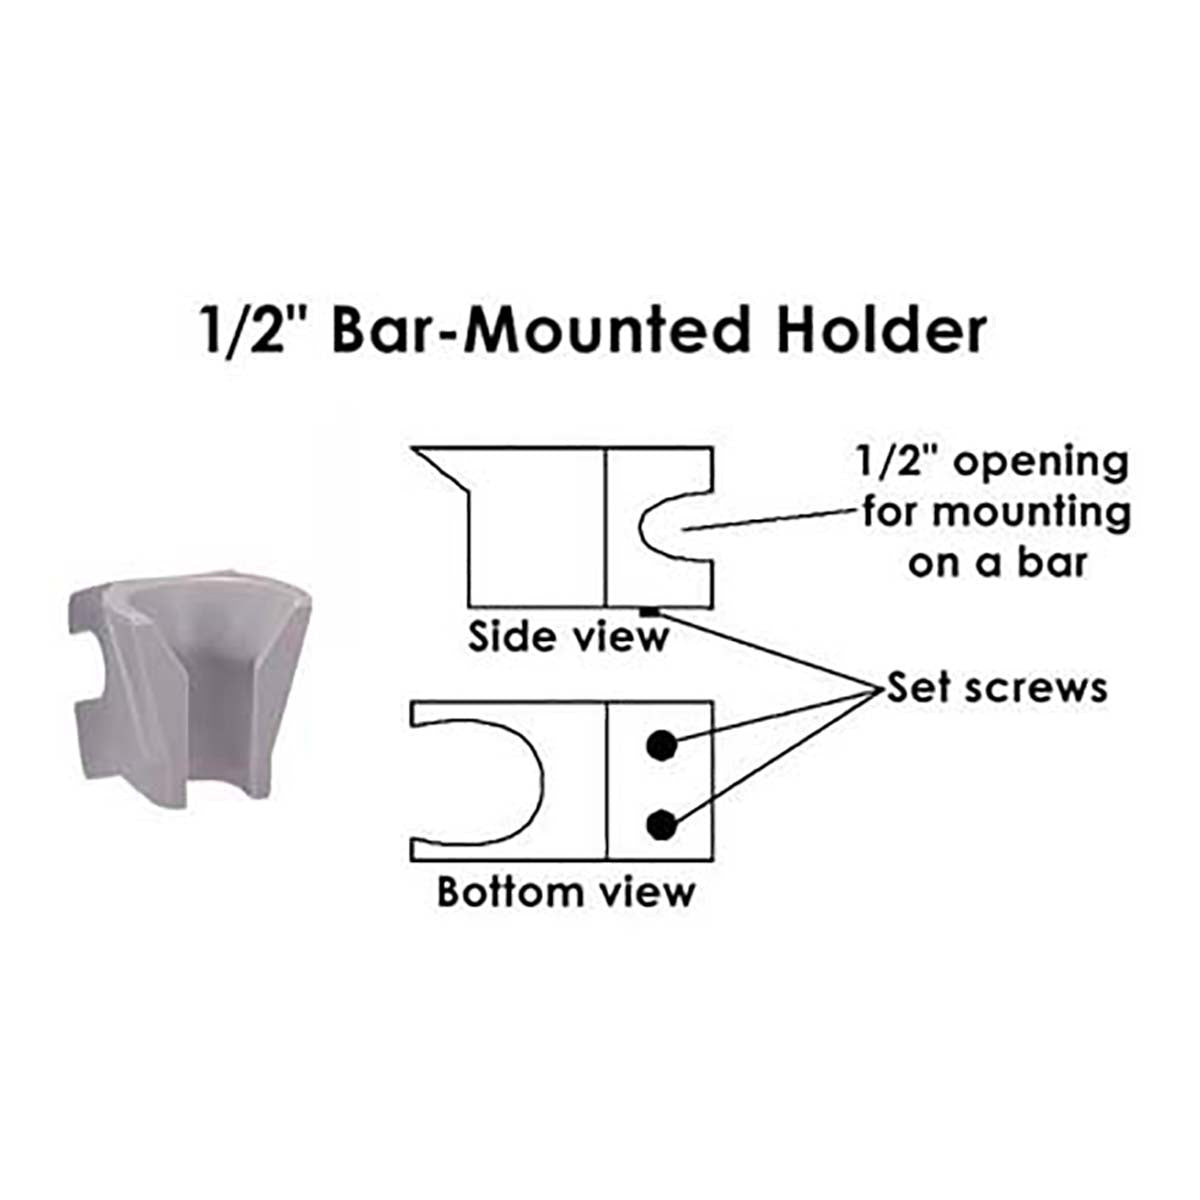 Holder With 1/2" on Bar